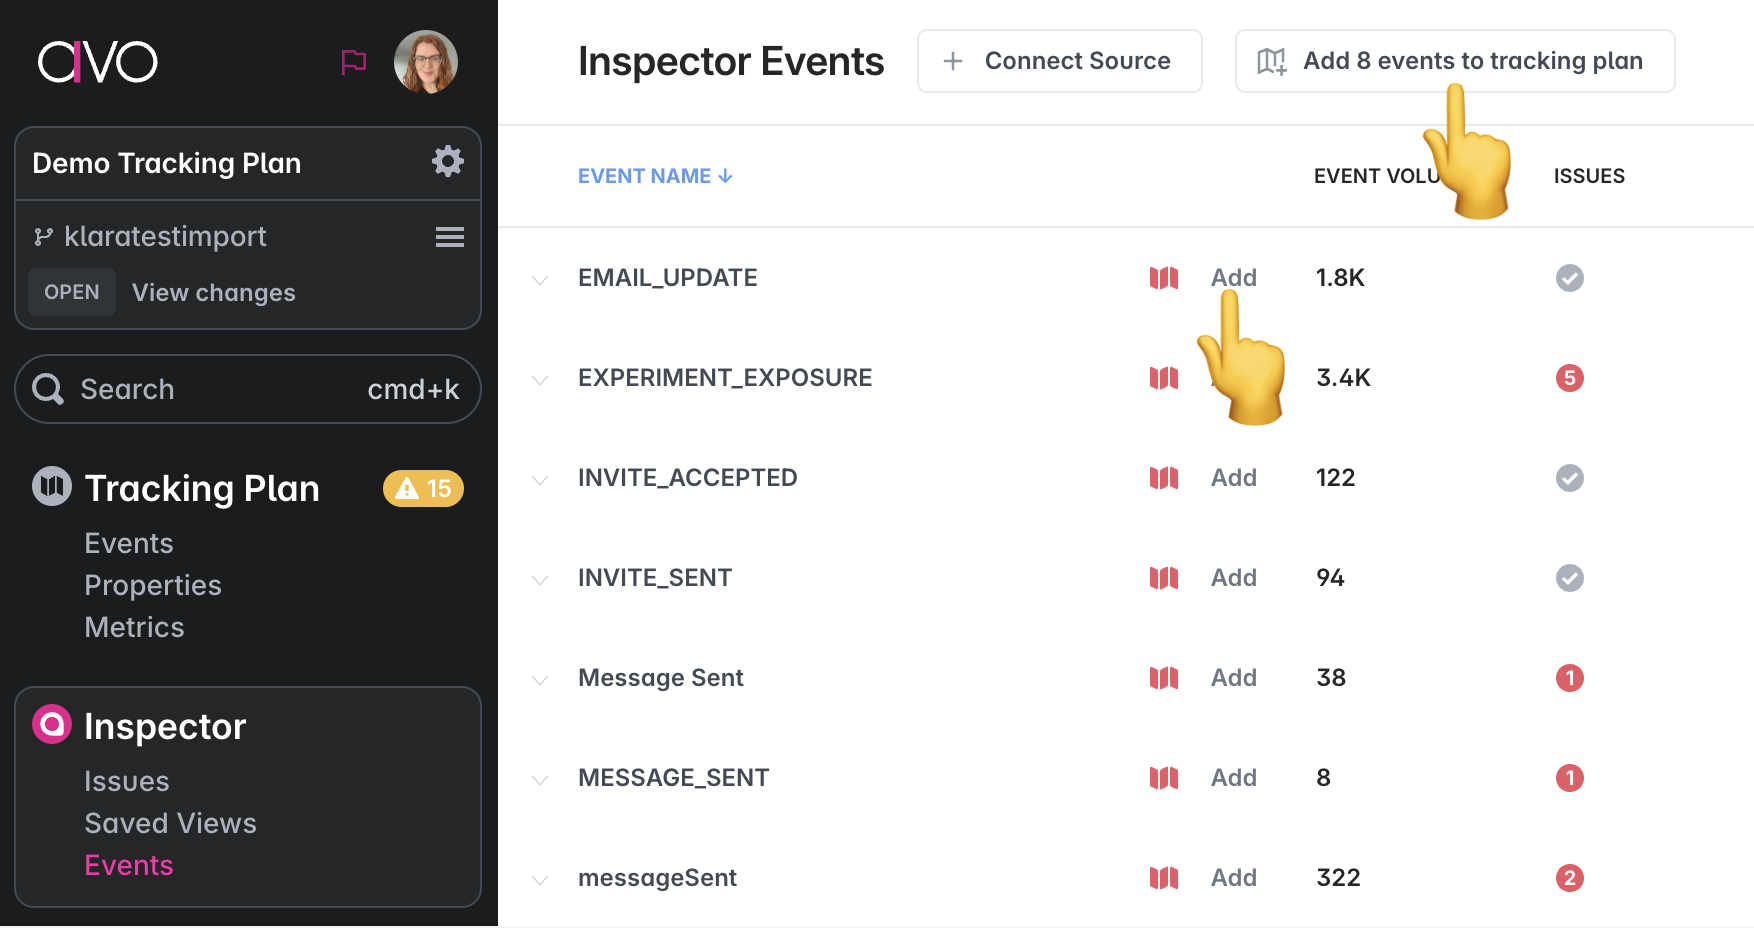 Add events from Inspector events image